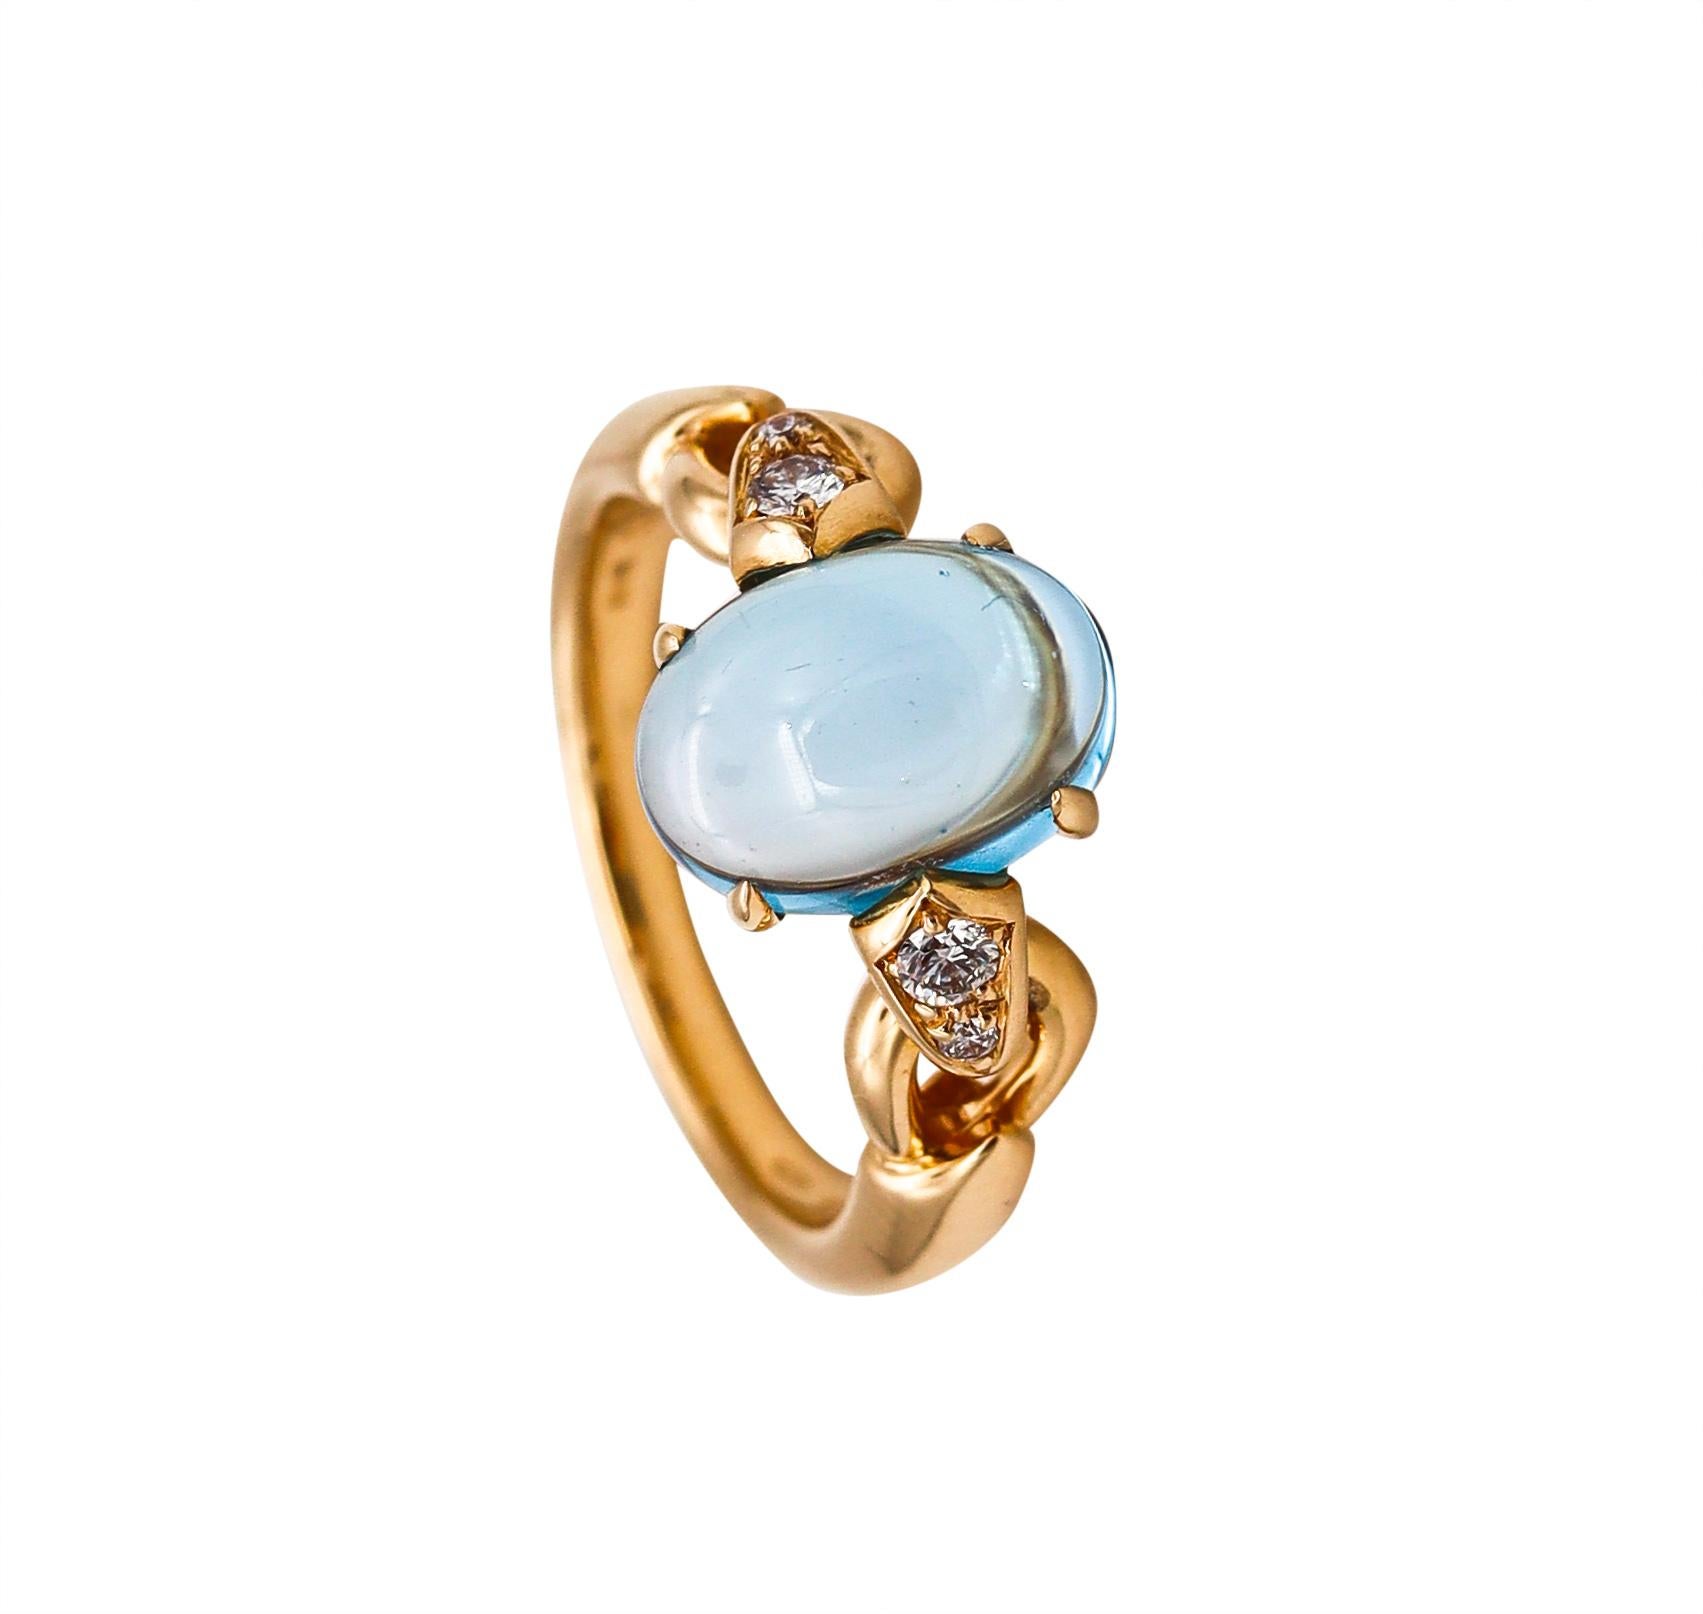 A ring designed by Bvlgari.

Colorful contemporary piece, created in Roma Italy by the jewelry house of Bvlgari. This youthful ring has been crafted in solid yellow gold of 18 karats, with high polished finish.

Mount in the center, with a movable